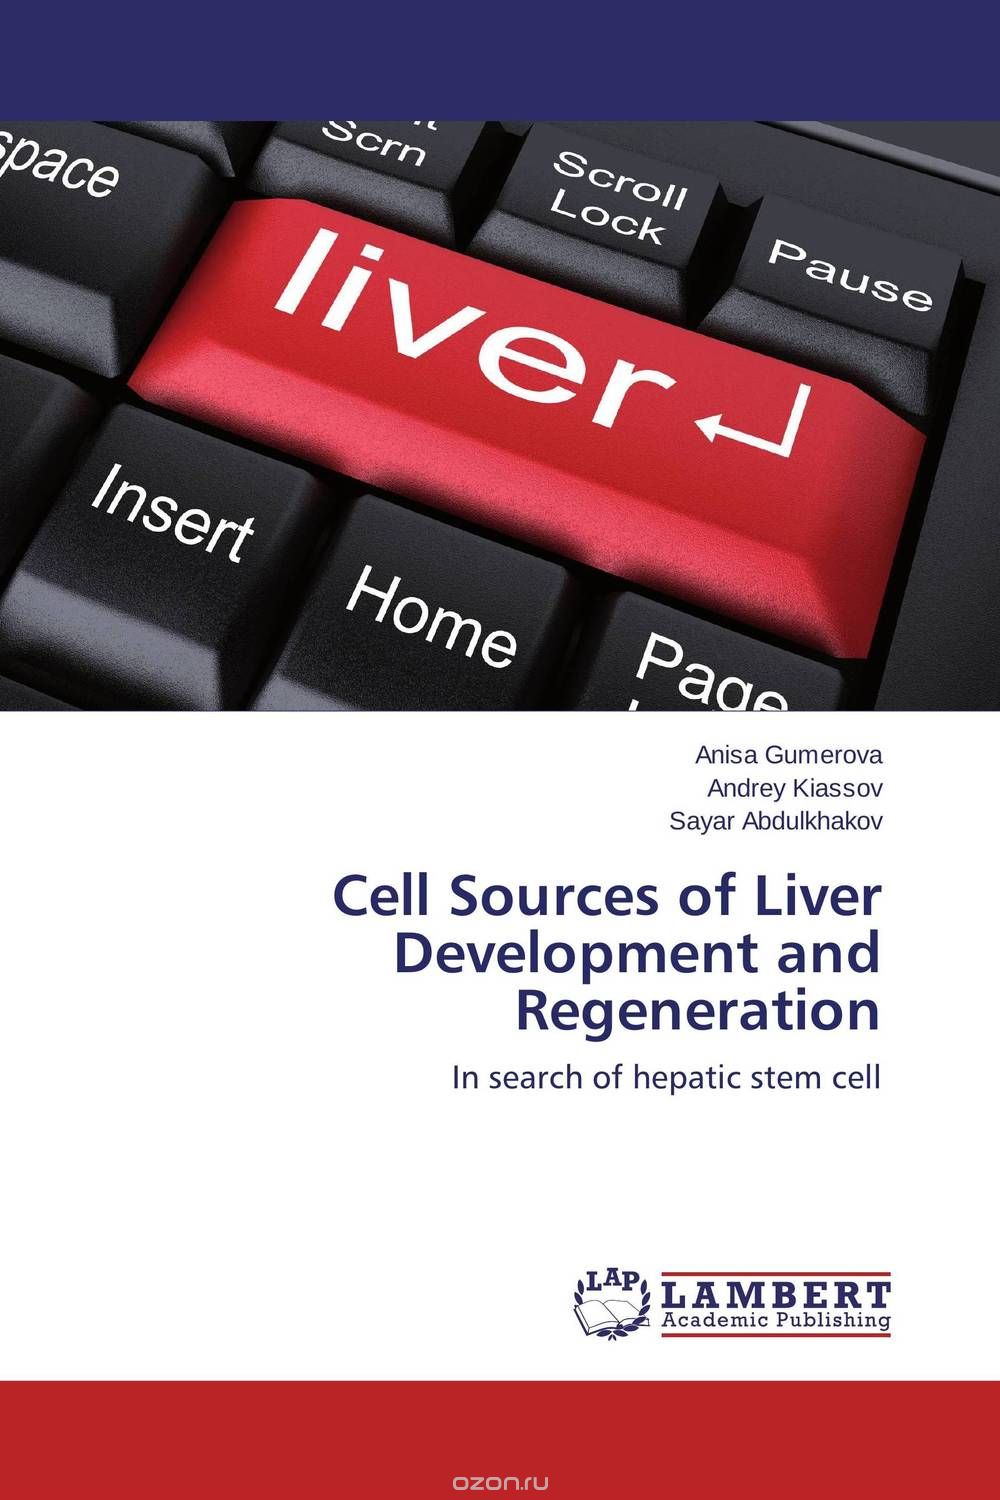 Cell Sources of Liver Development and Regeneration